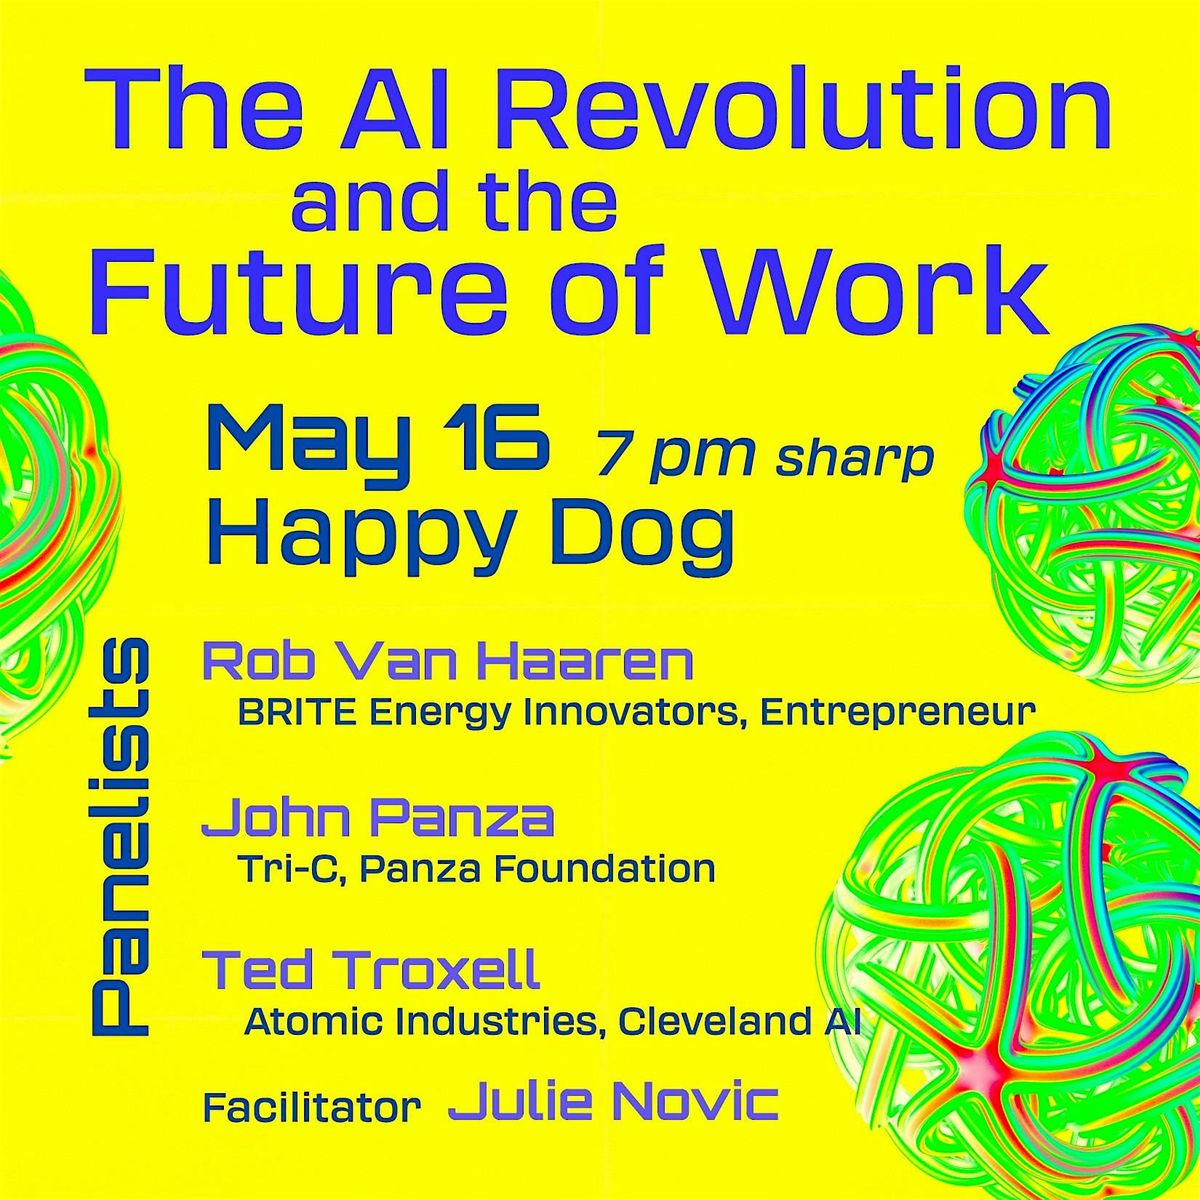 The AI Revolution & The Future of Work - a Panel Discussion